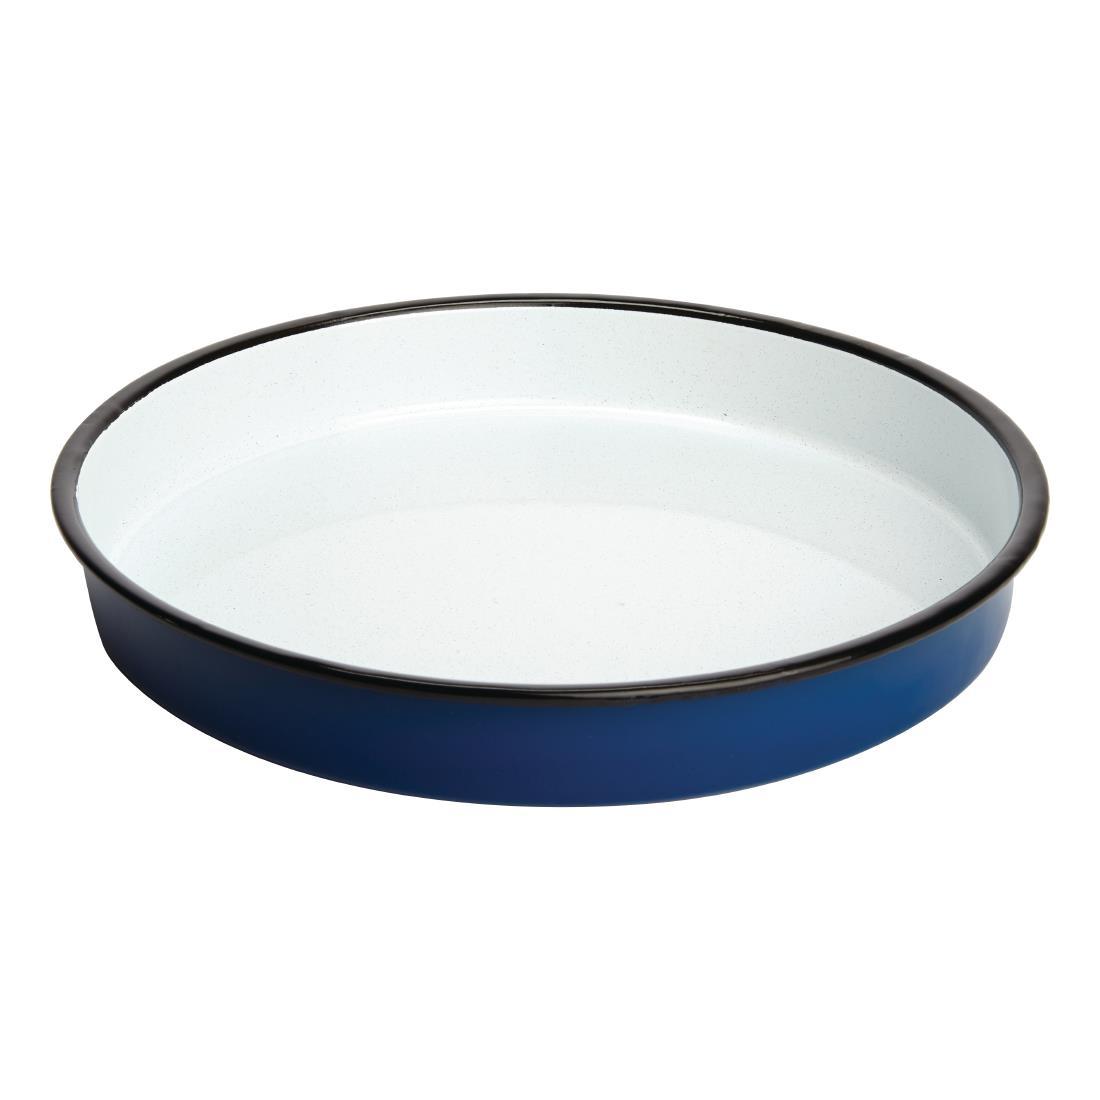 Olympia Enamelled Steel Round Service Tray 320mm - GM240  - 3